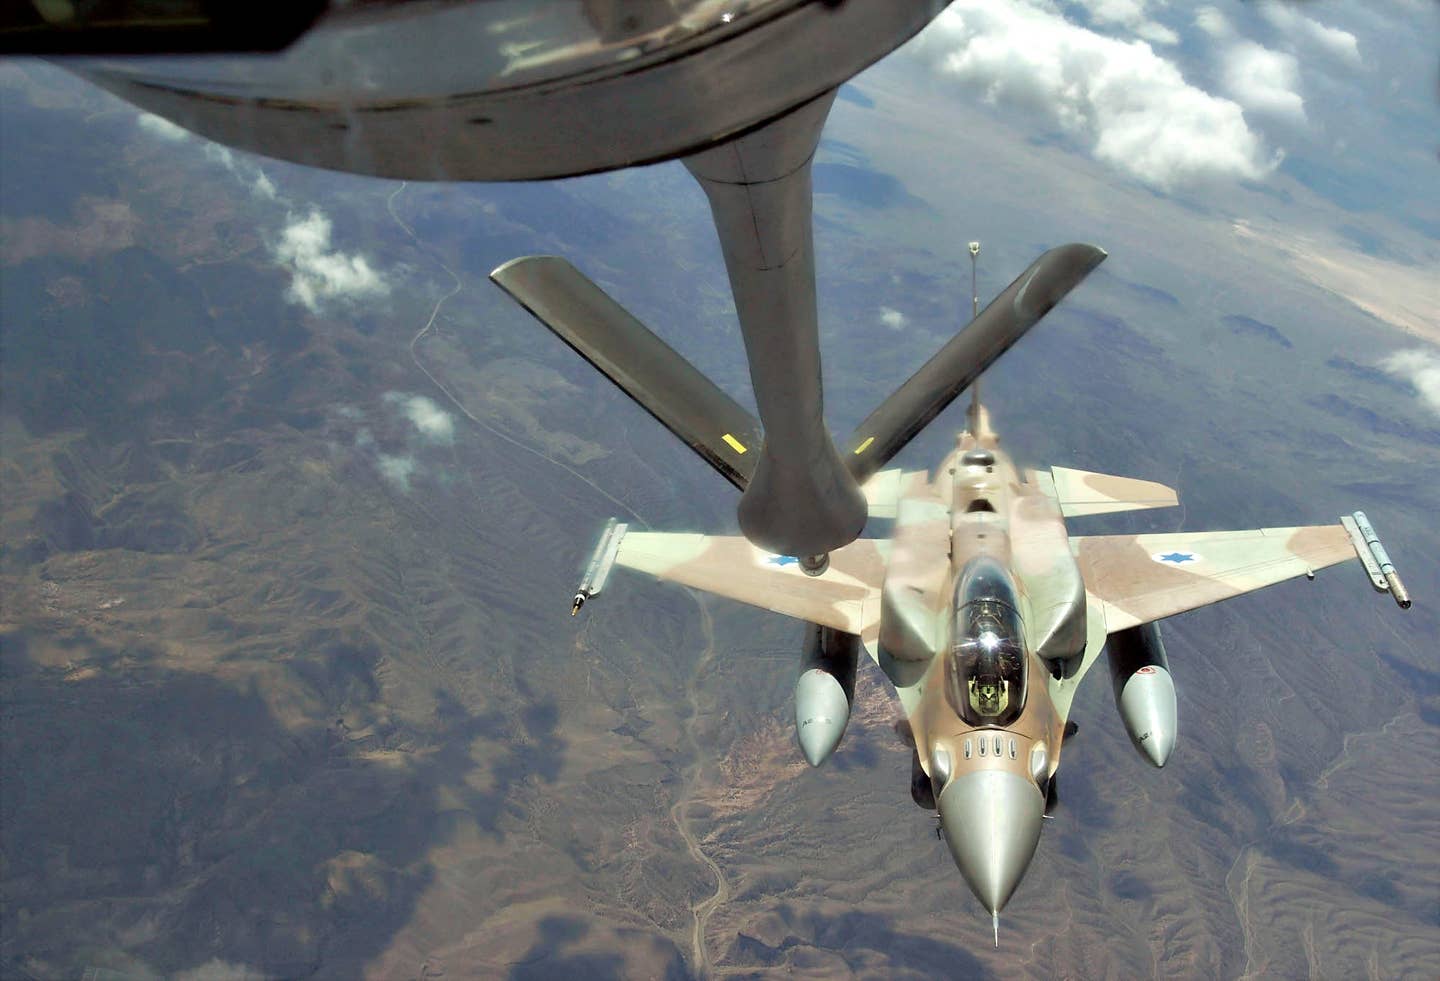 An Israeli Air Force F-16 from Ramon Air Base, Israel, moves into refueling position July 17, 2009, over the Nevada Test and Training Range during Red Flag 09-4. (U.S. Air Force photo by Master Sgt. Kevin J. Gruenwald)